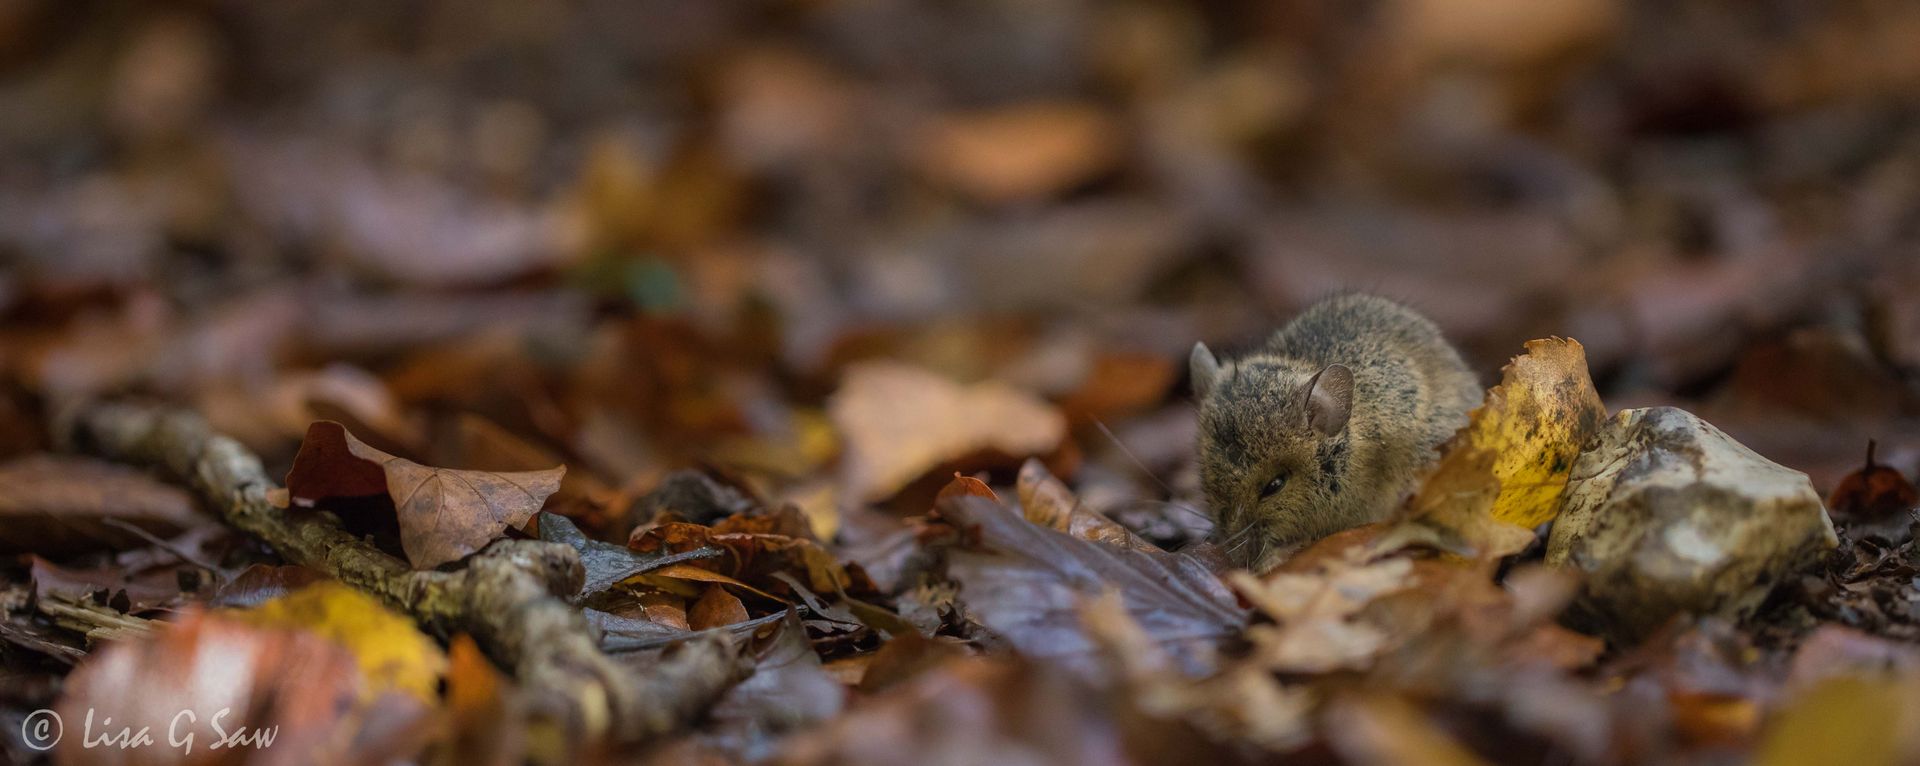 Wood Mouse rootling through the leaf litter, Slindon Woods